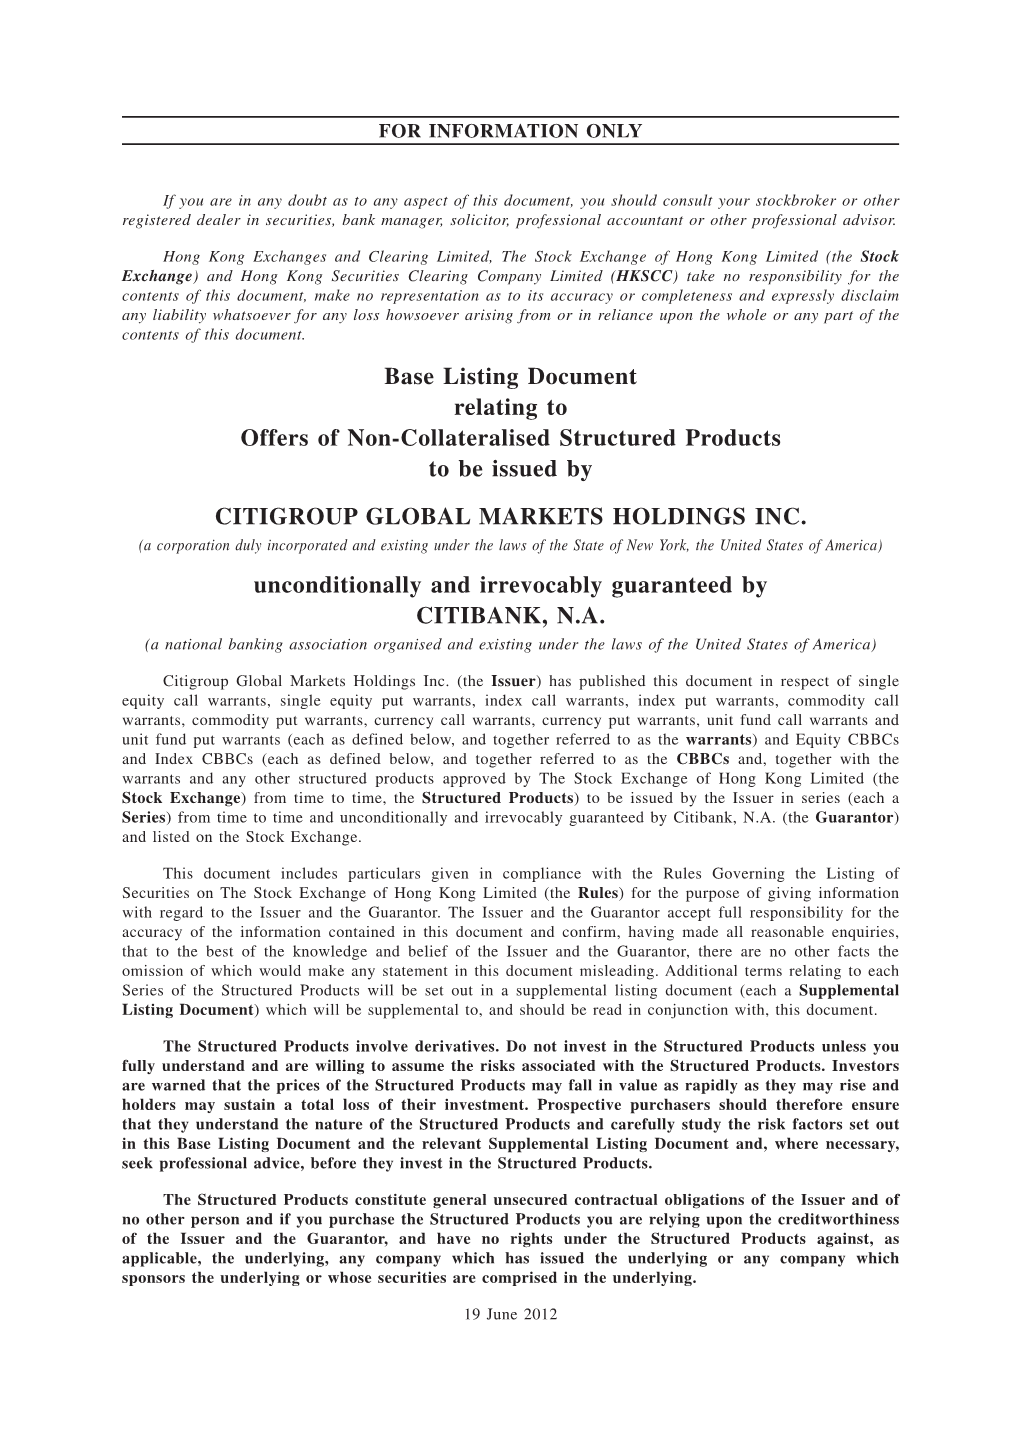 Base Listing Document Relating to Offers of Non-Collateralised Structured Products to Be Issued by CITIGROUP GLOBAL MARKETS HOLDINGS INC